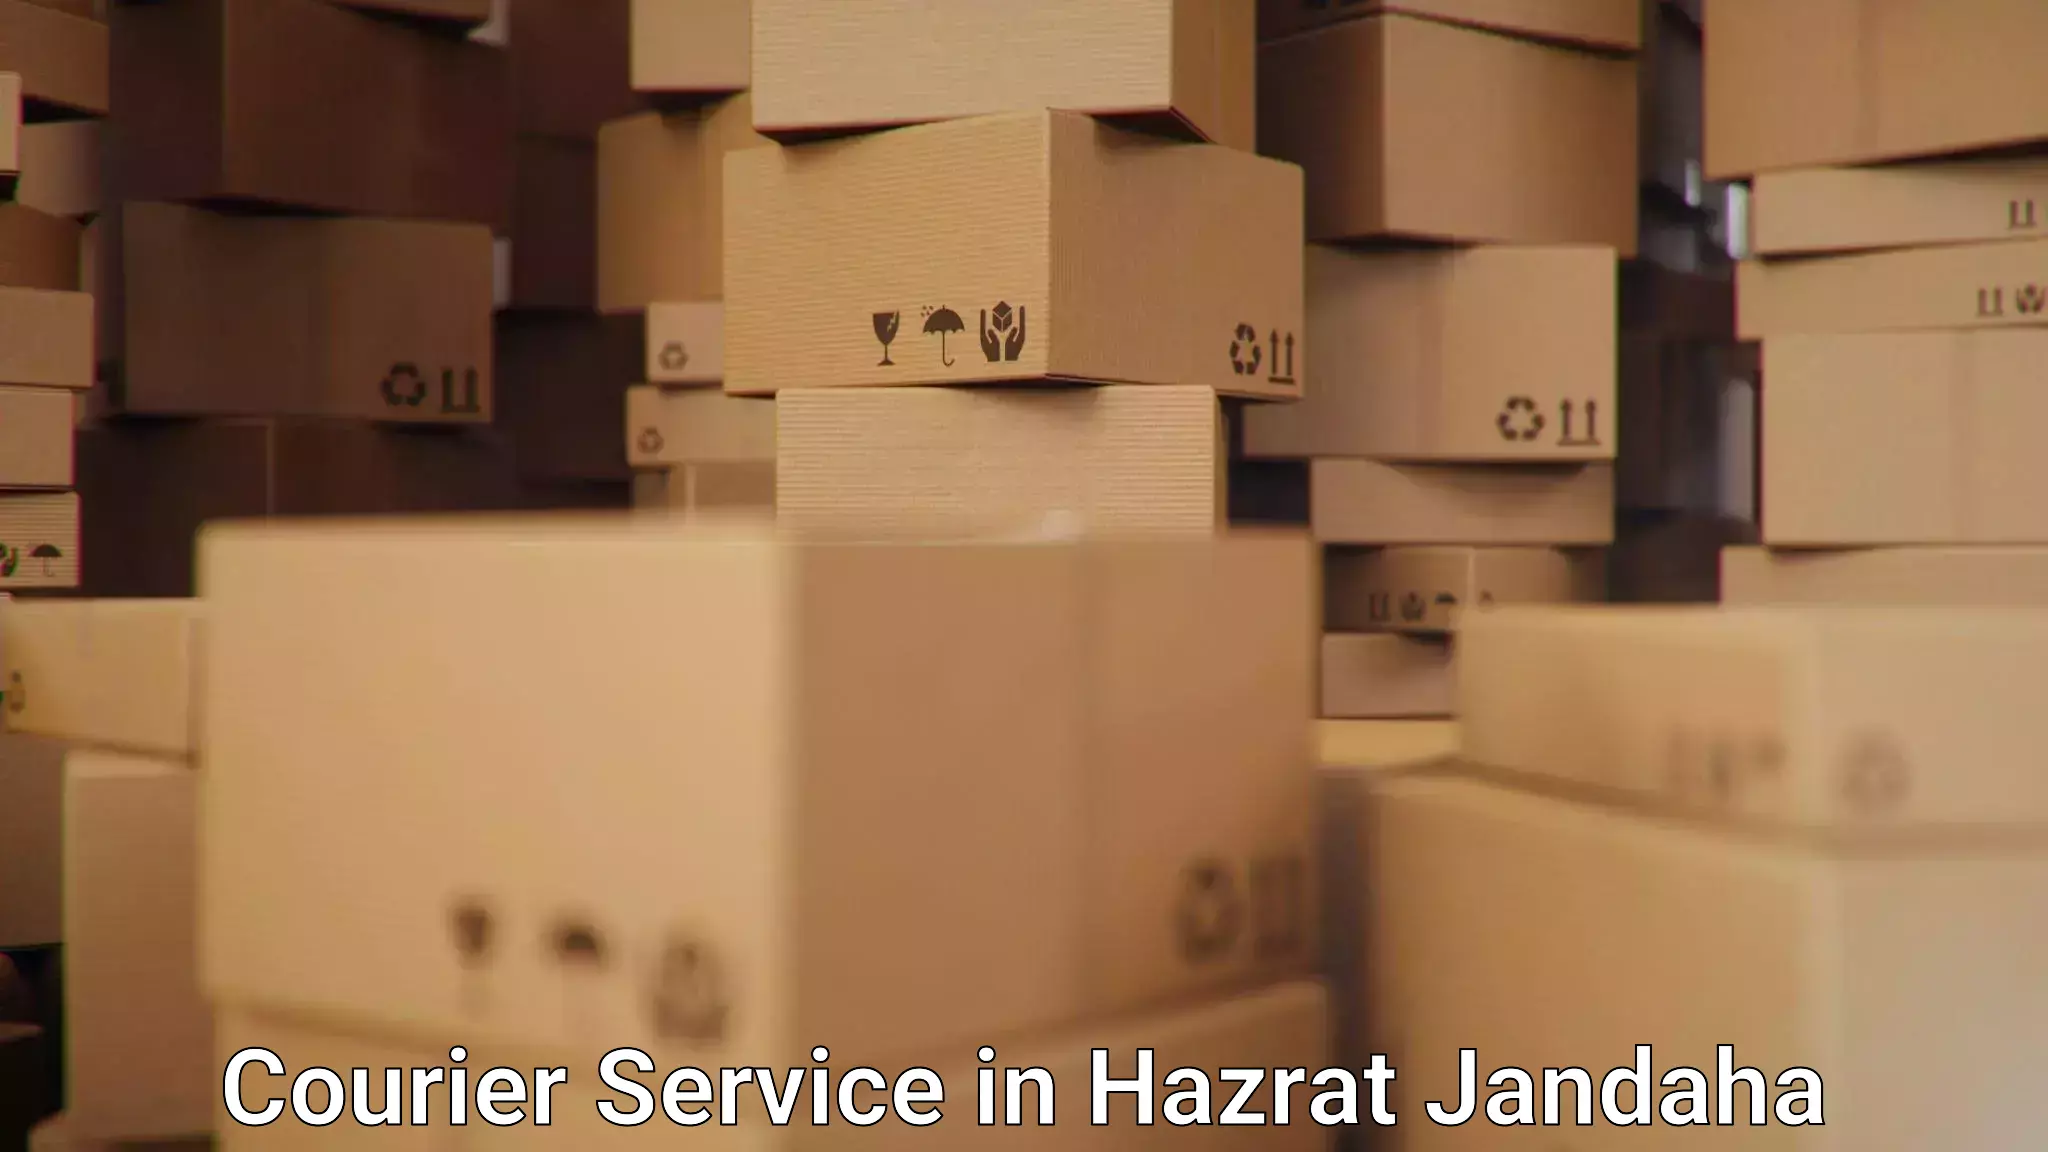 Affordable shipping solutions in Hazrat Jandaha